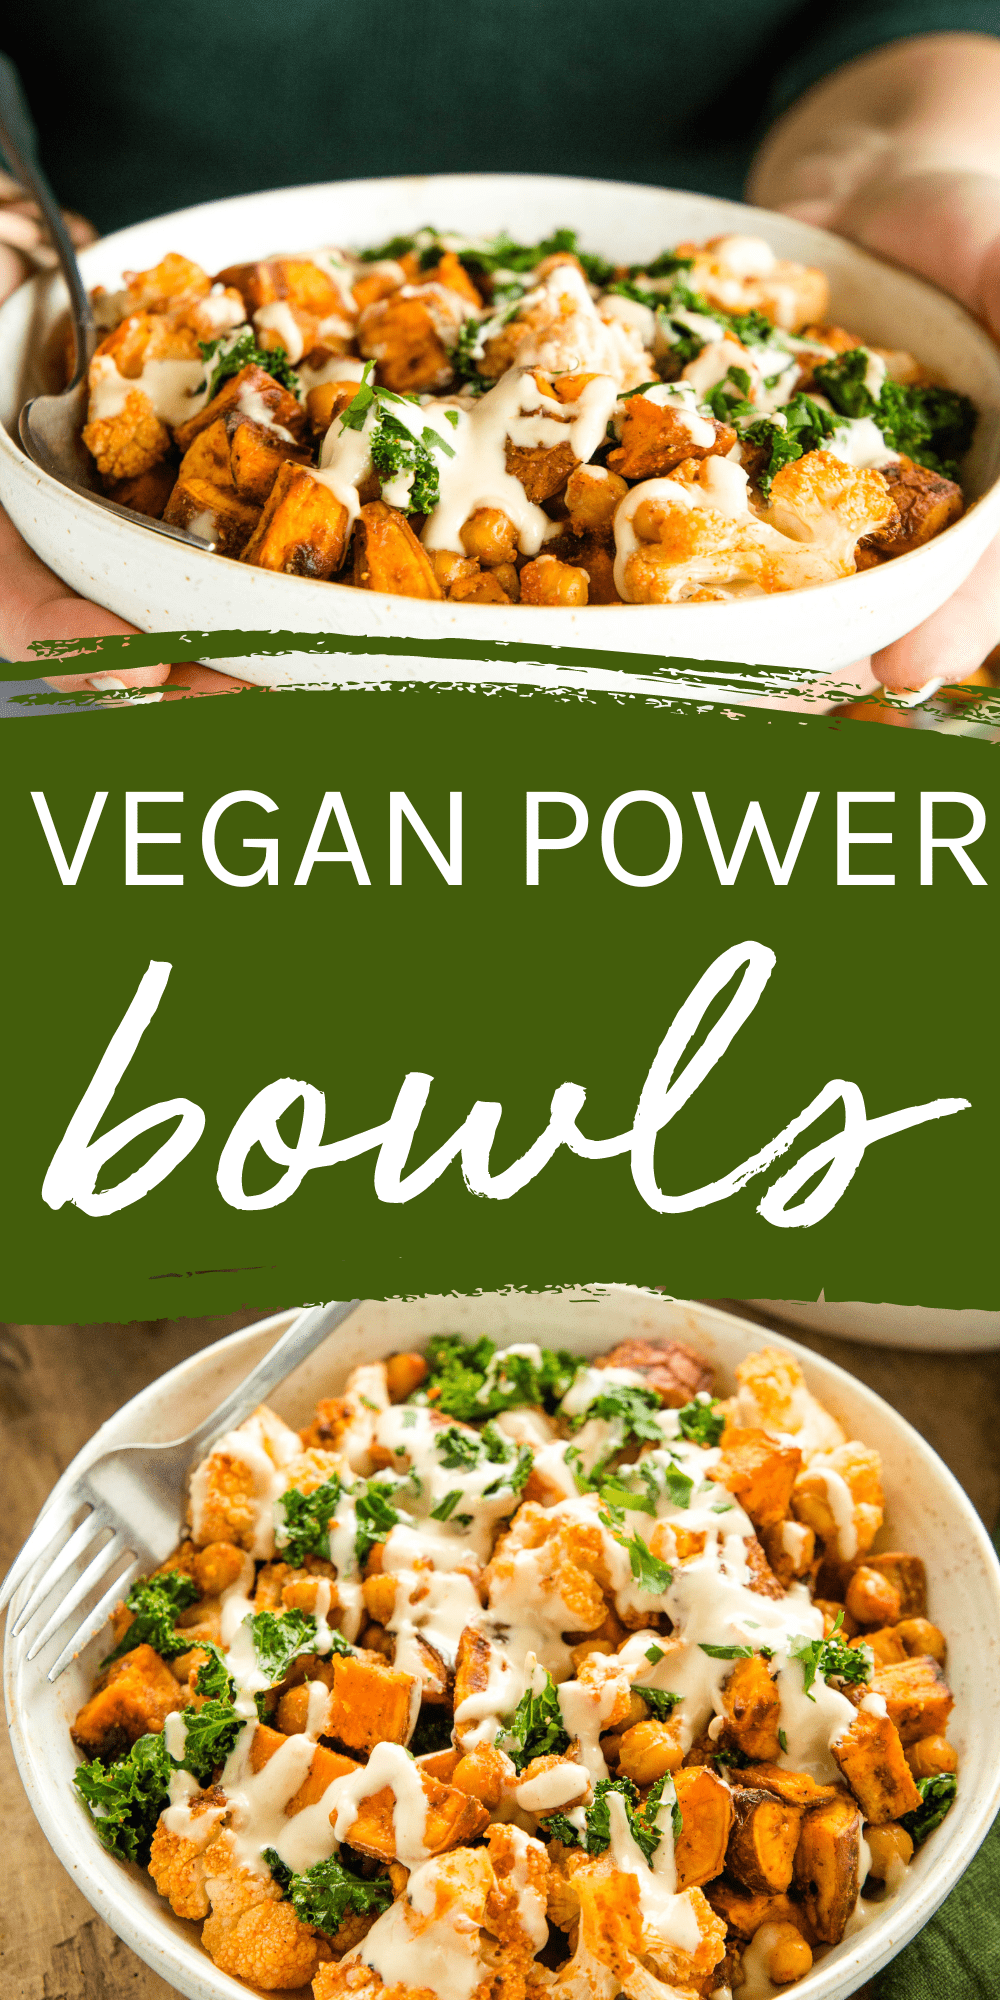 This Power Bowl Recipe is ultra nutritious, plant-based, & packed with fresh ingredients like cauliflower, sweet potatoes, chickpeas and kale. A vegan meal prep recipe ready in under 30 minutes! Recipe from thebusybaker.ca! #powerbowl #nutritious #healthy #health #plantbased #vegan #vegetarian #buddabowl via @busybakerblog